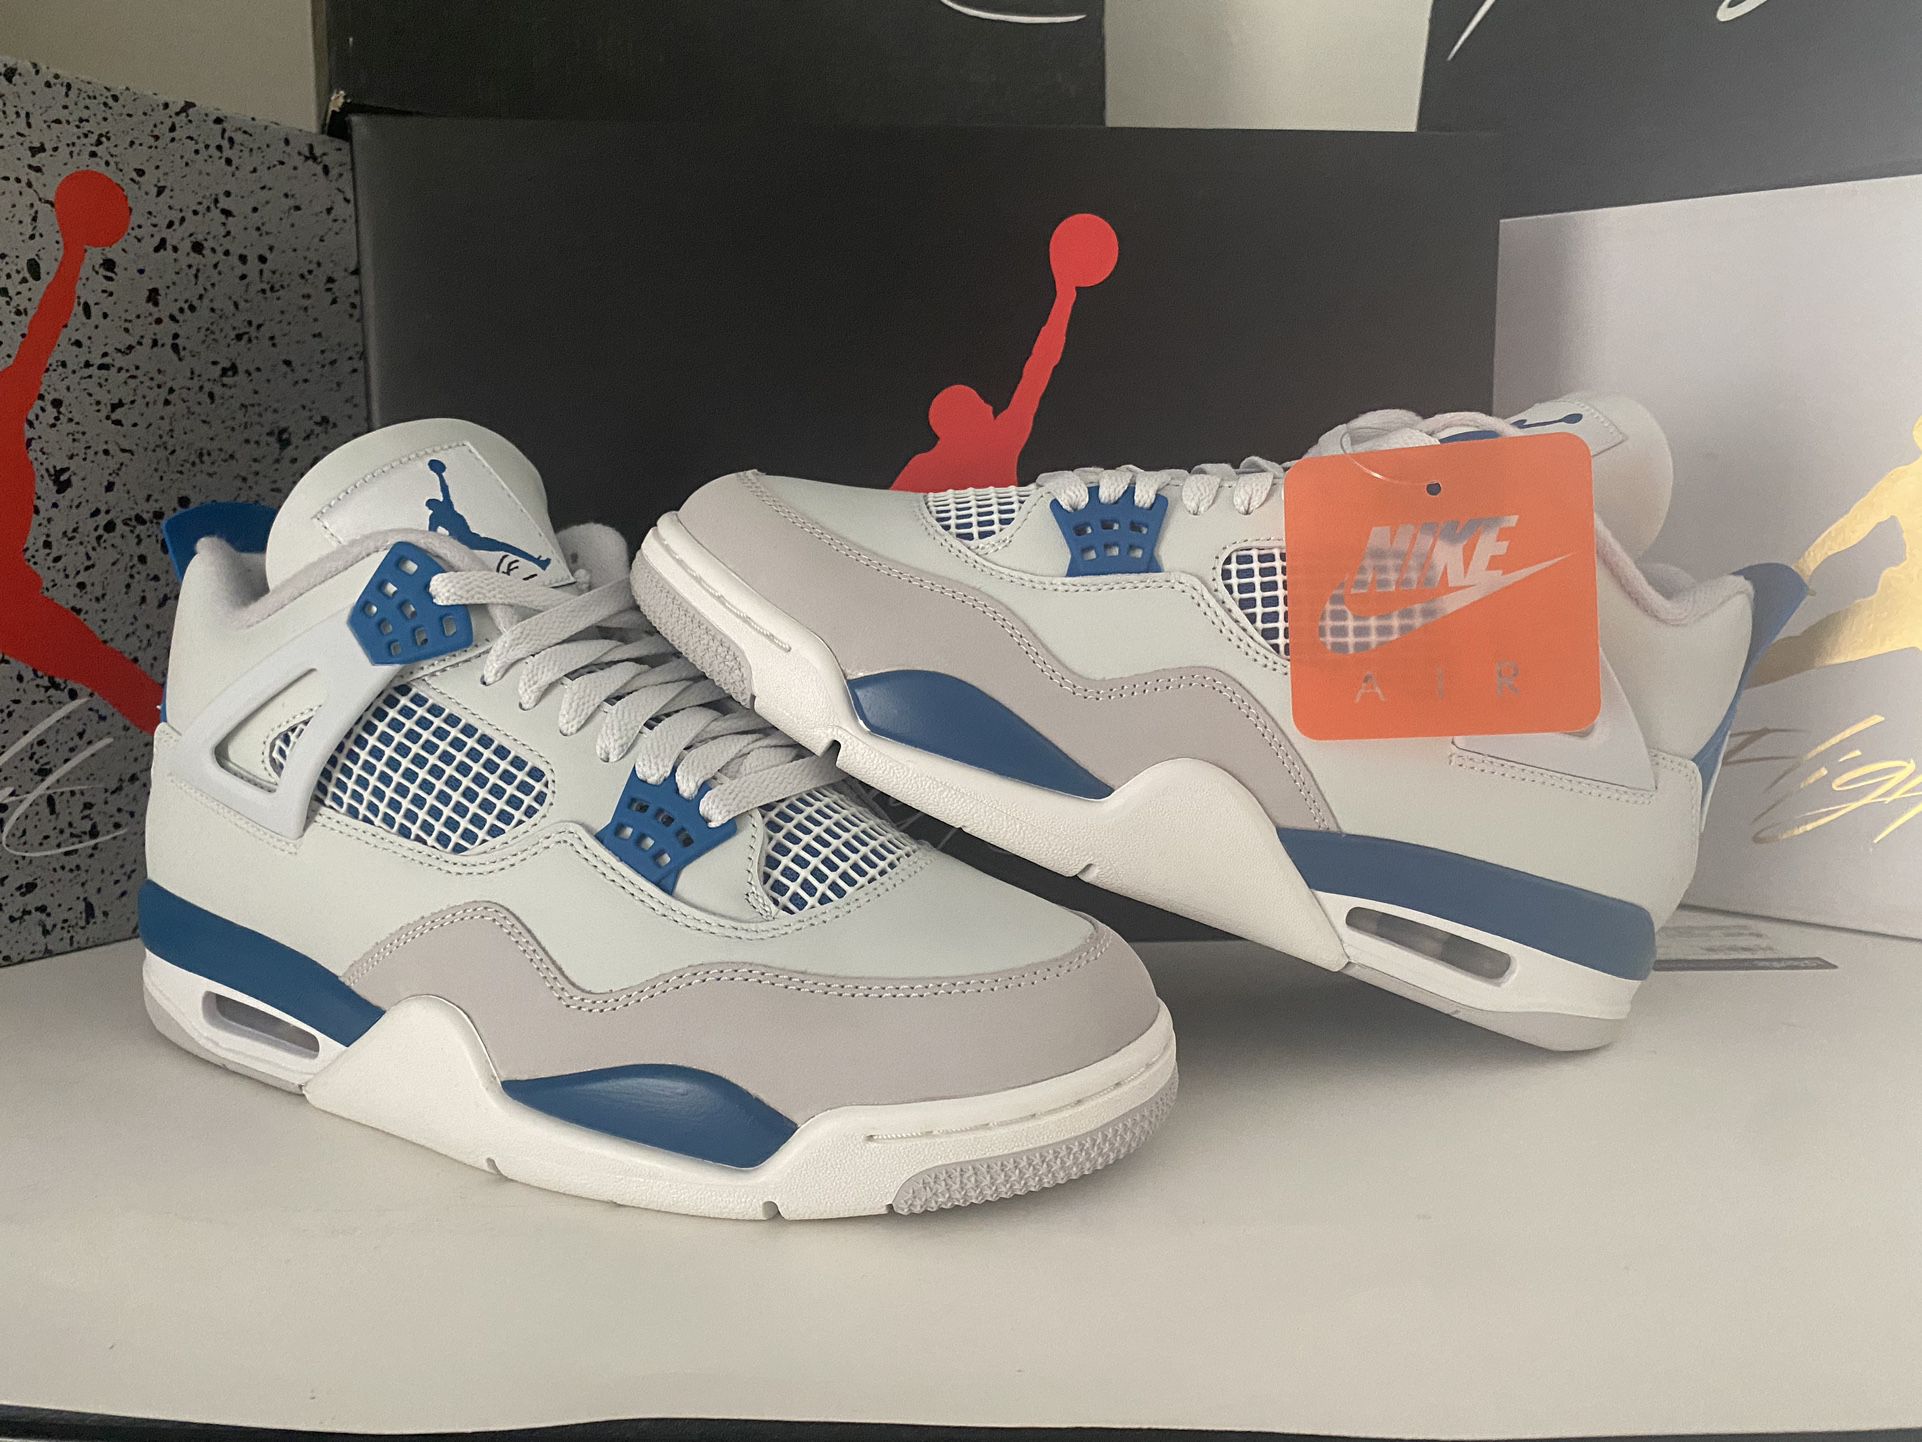 Air Jordan 4 Retro Military Blue size 10 ( pick up only ) $260 Firm